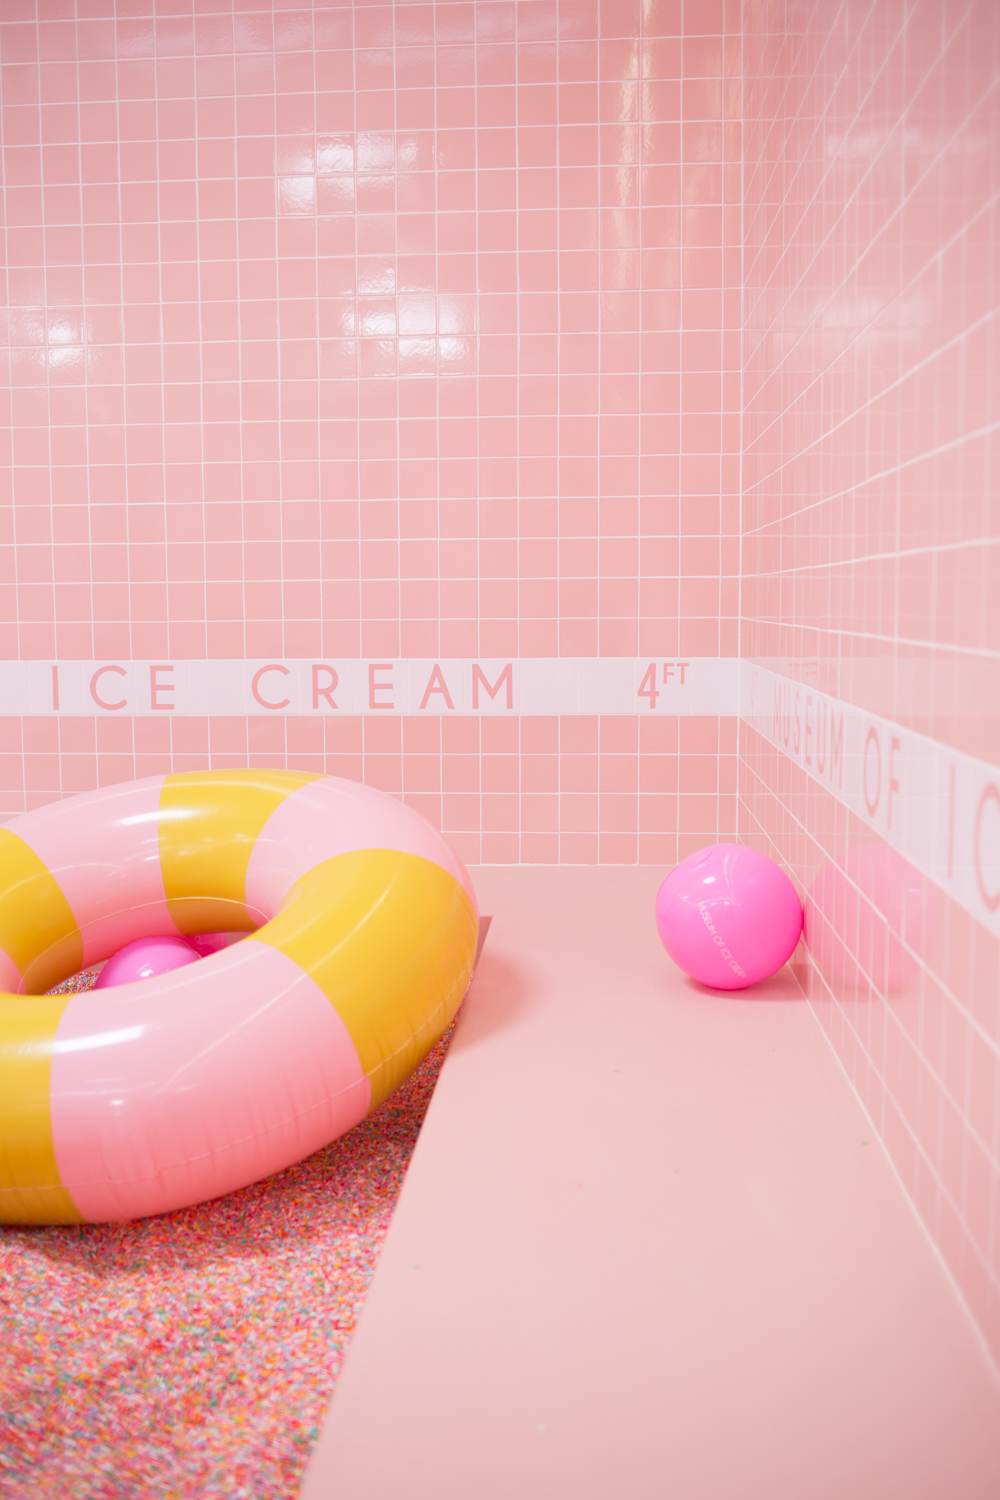  Photograph all of the pool floats & subway tile dreams 